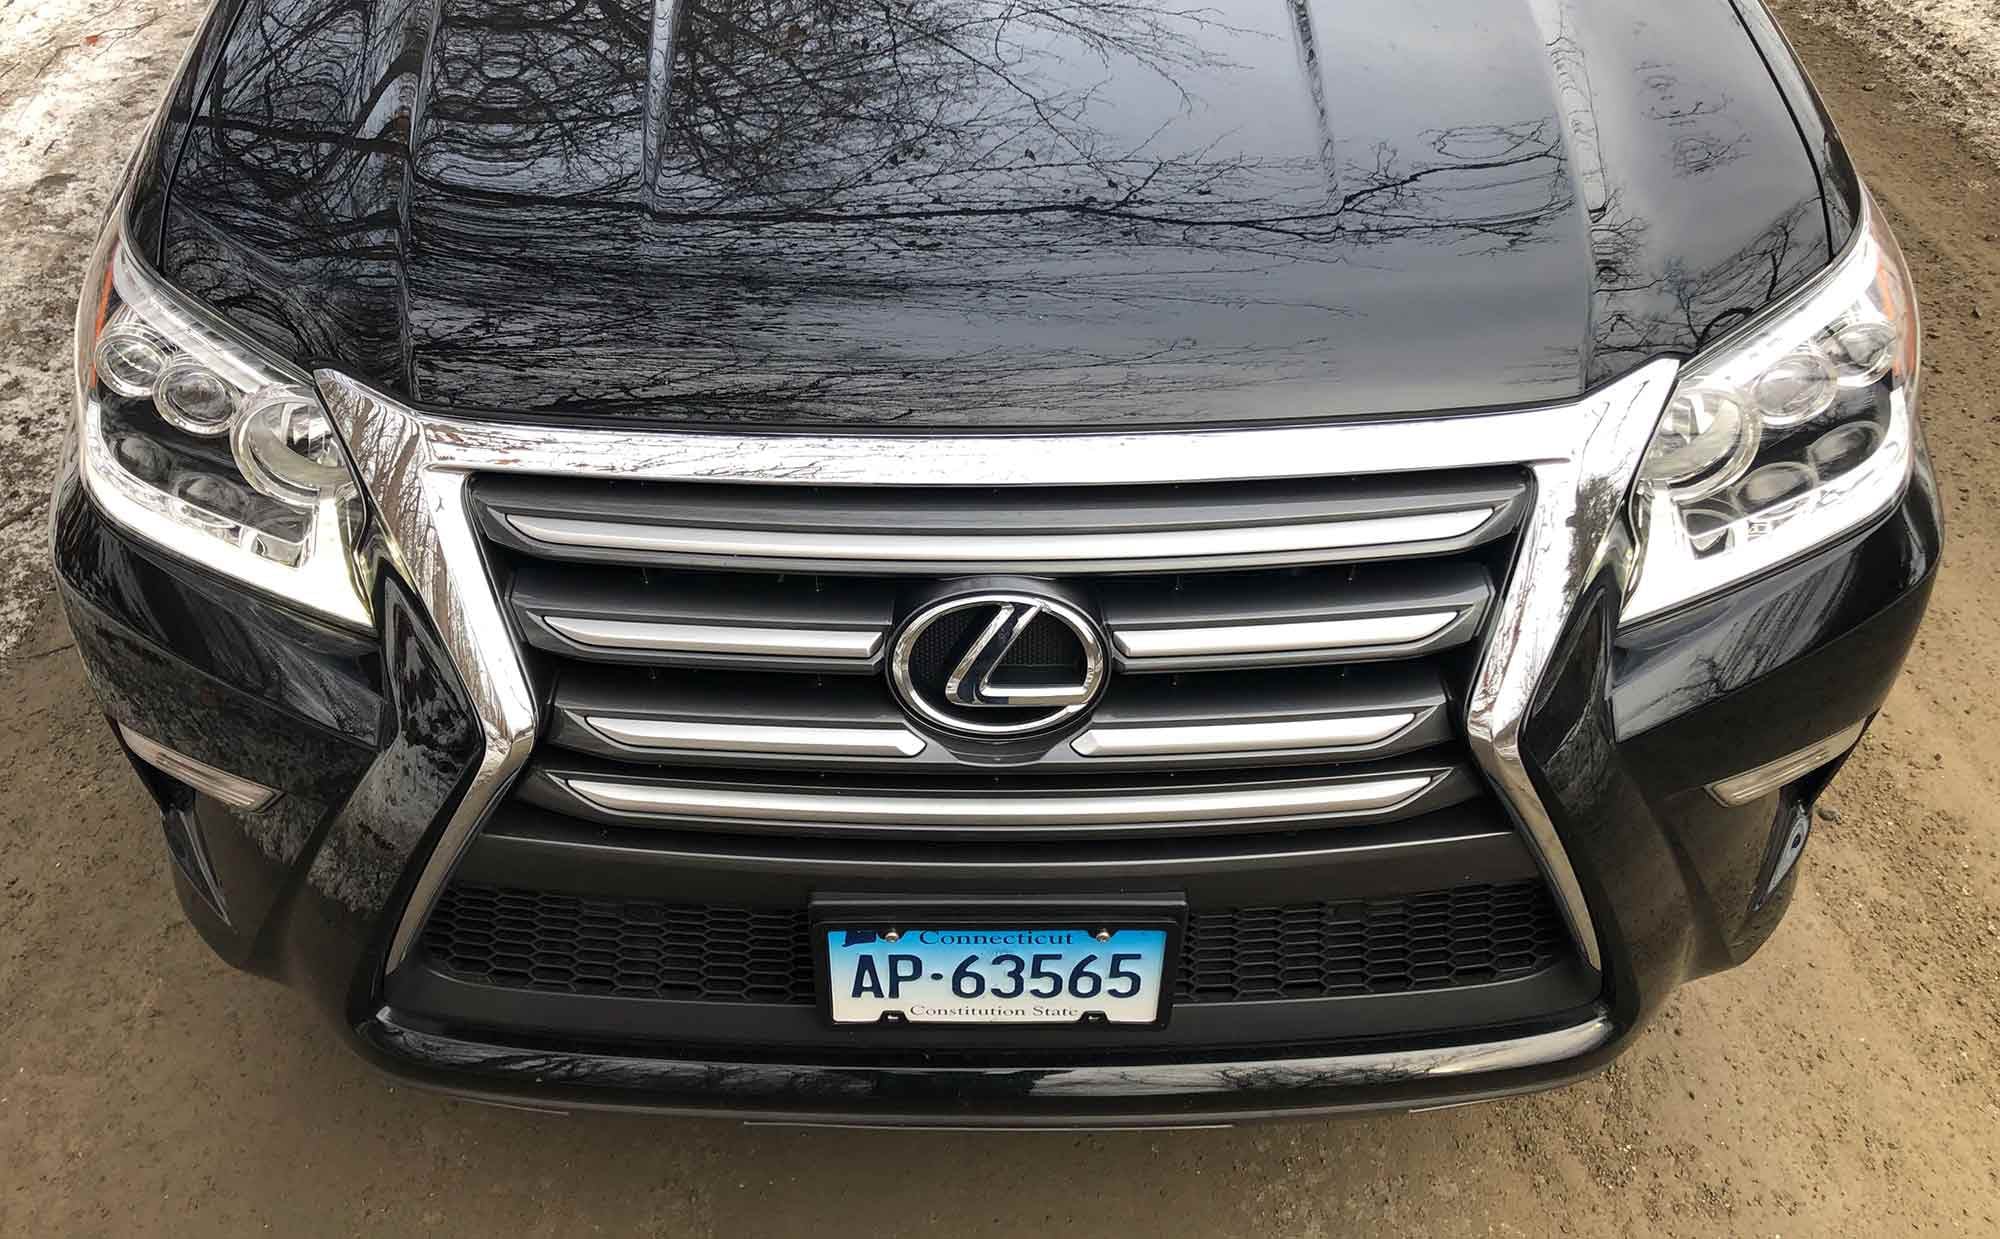 The Lexus GX 460 is a Toyota 4Runner in a suit and with both V-8 power and more towing capacity than its ’Yota counterpart. We love it.